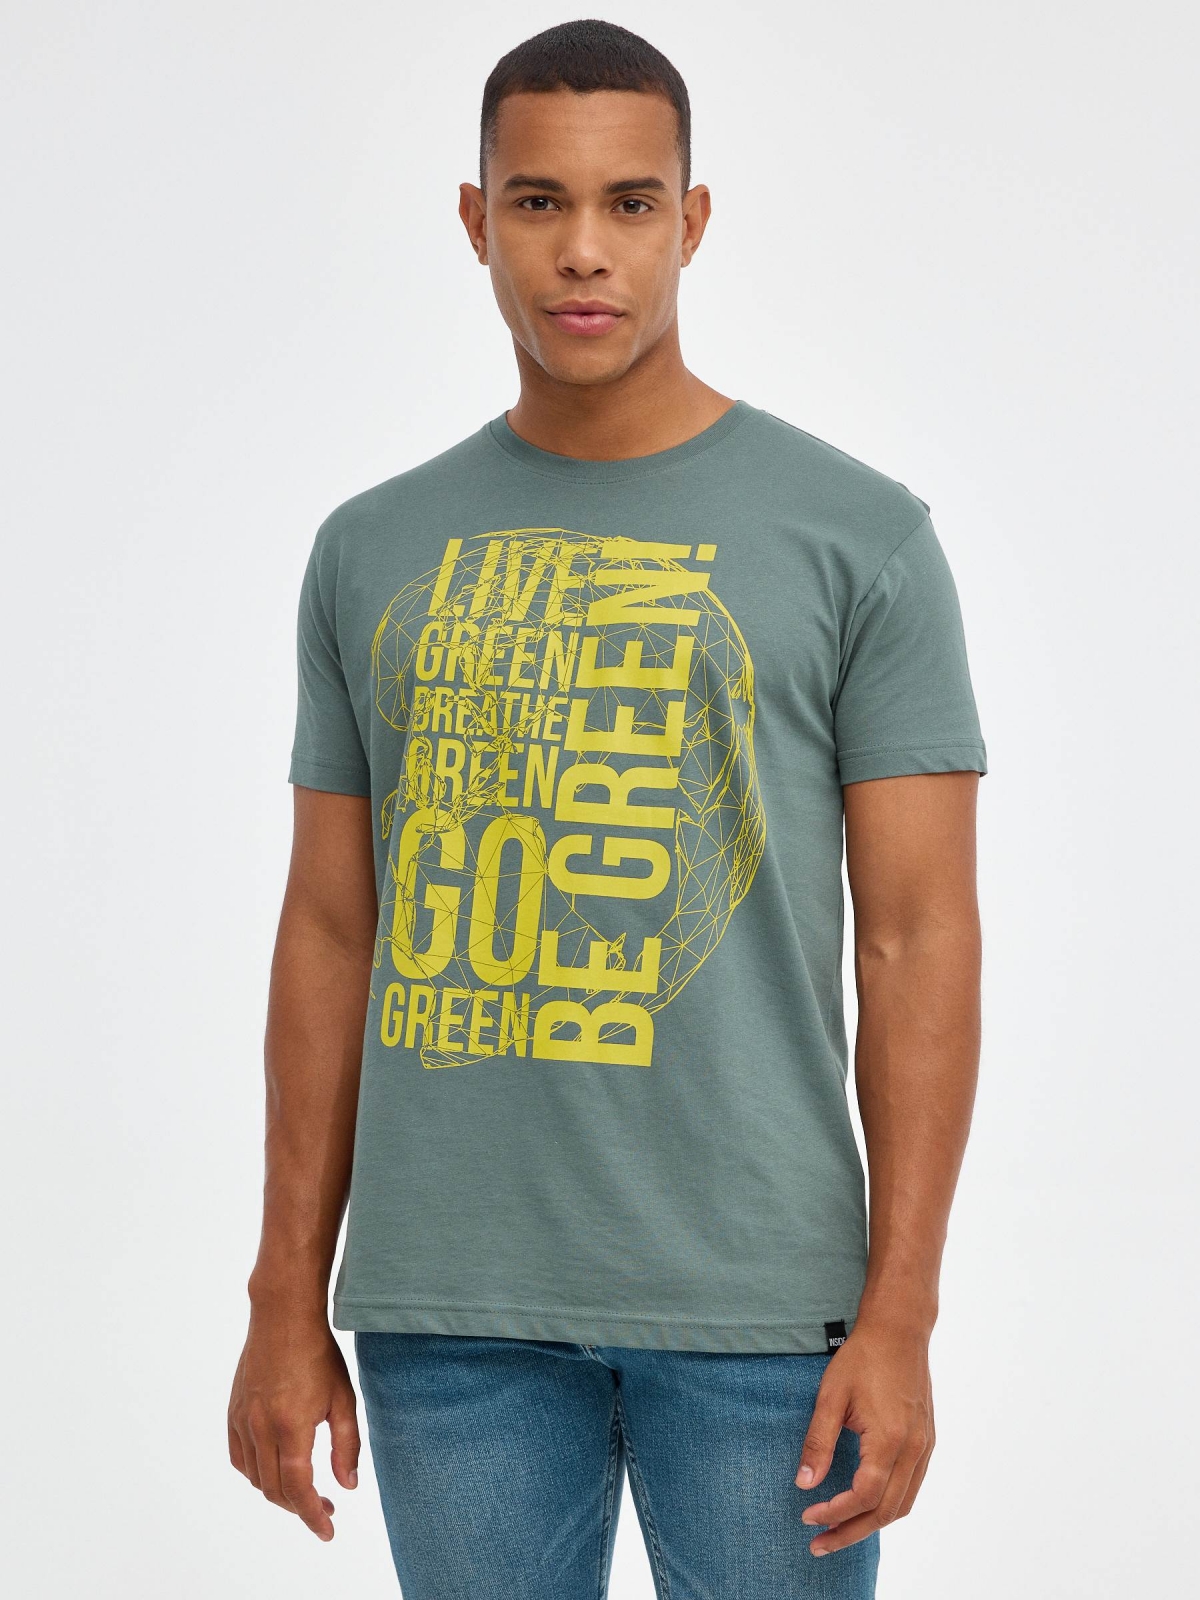 Be Green T-shirt greyish green middle front view